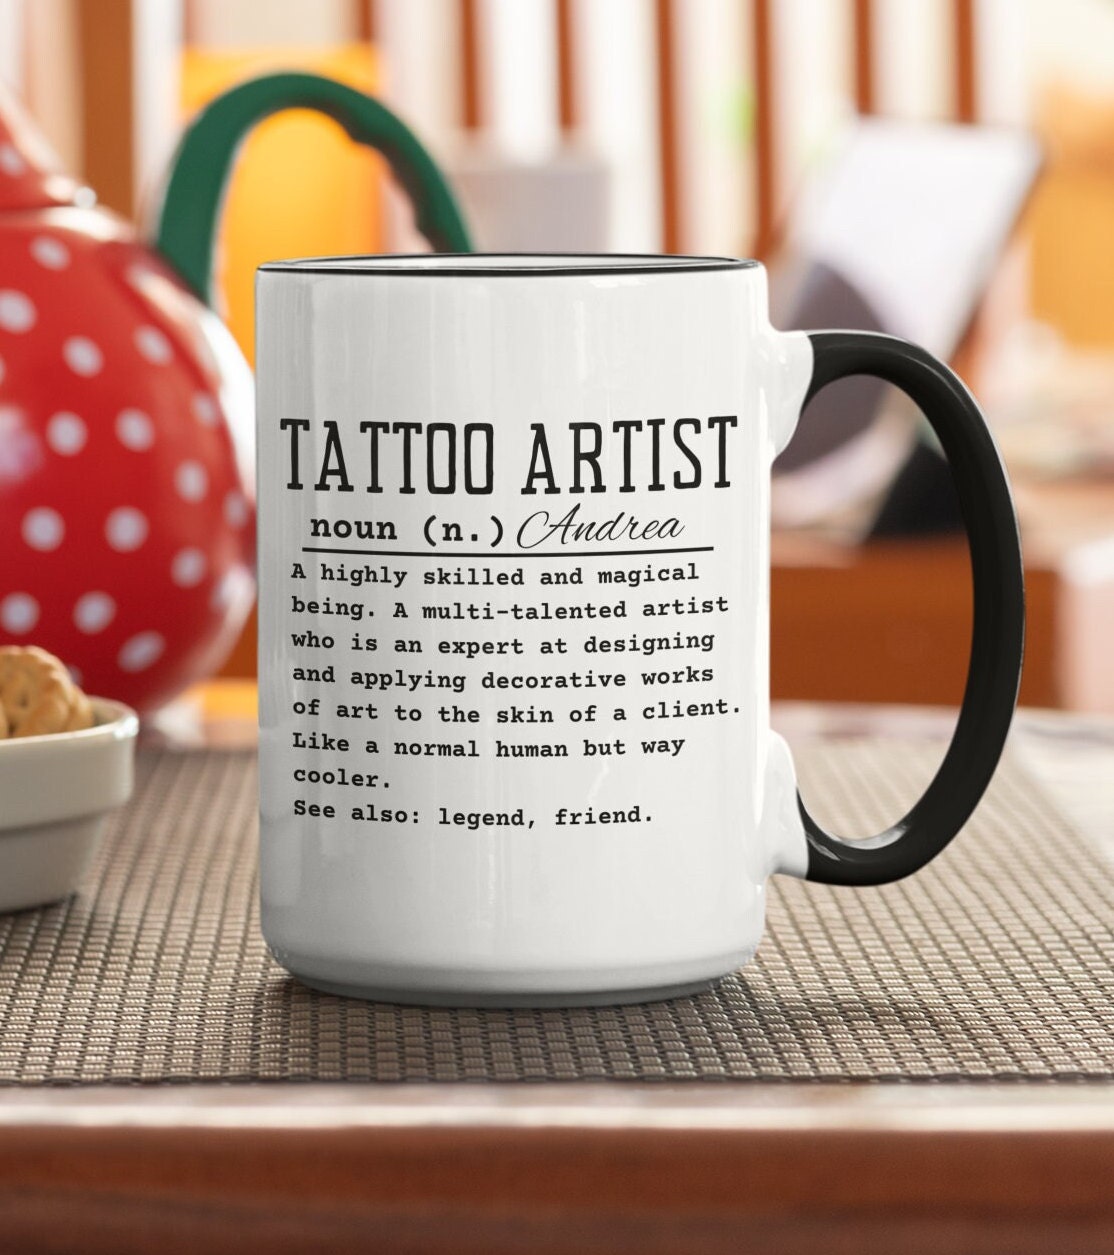 10 Unique Custom Gifts That Will Delight Tattoo Artists